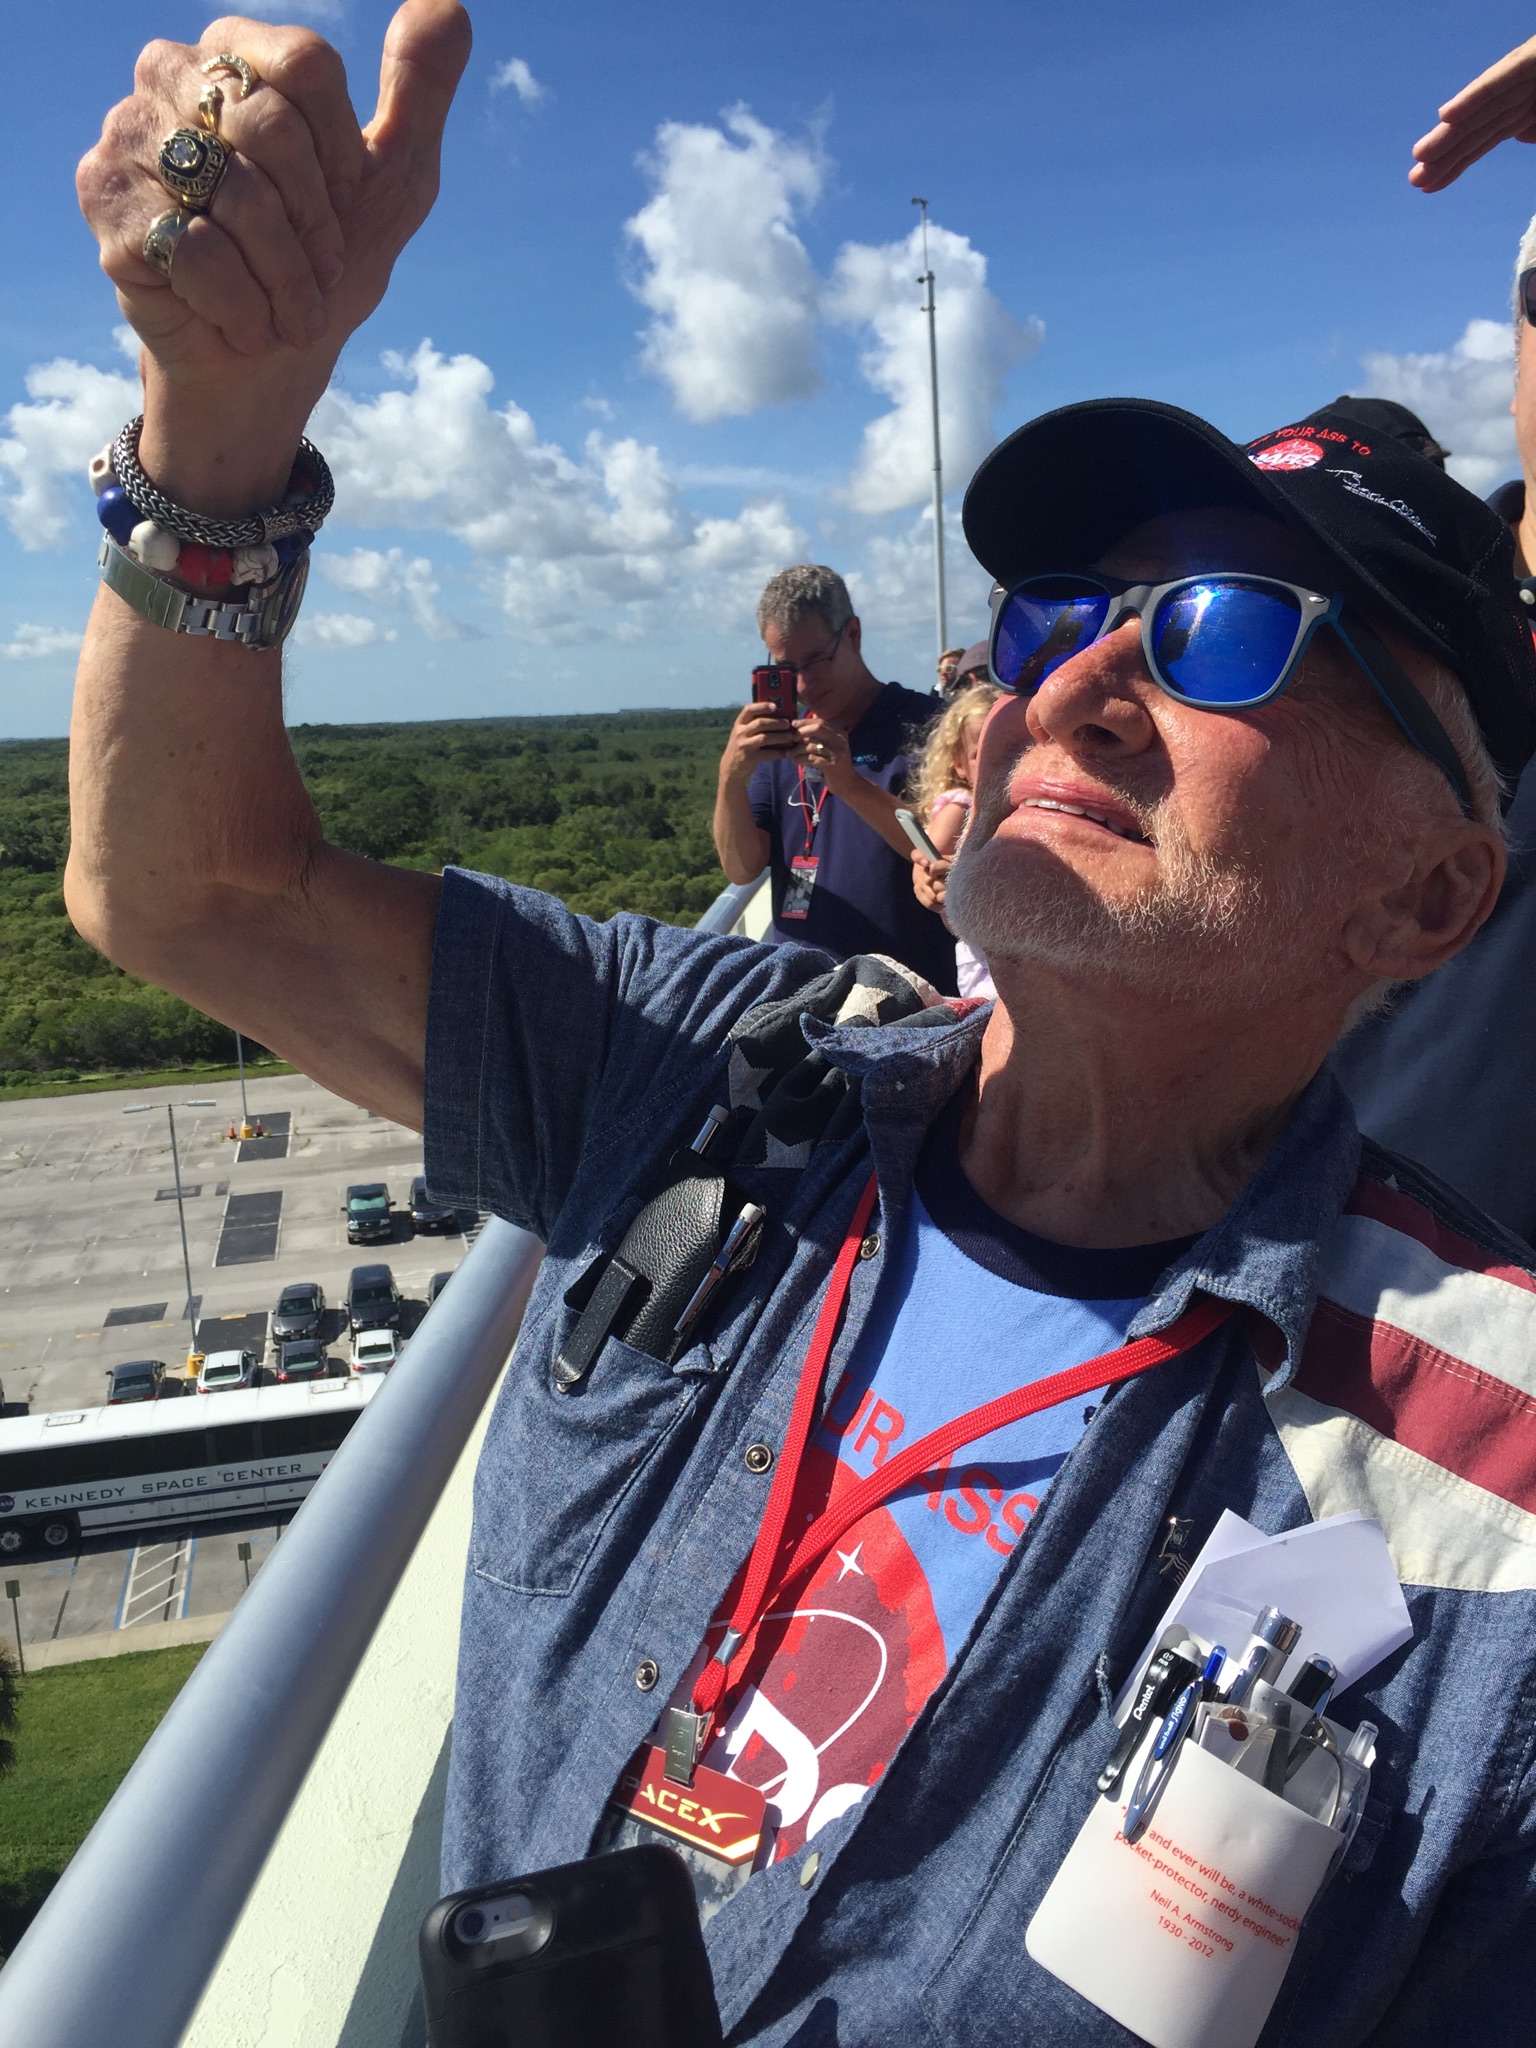 Dr. Buzz Aldrin watches the Spacex Falcon 9 rocket launch on June 28, 2015  at the Kennedy Space Center in Florida. (Rob Varnas)